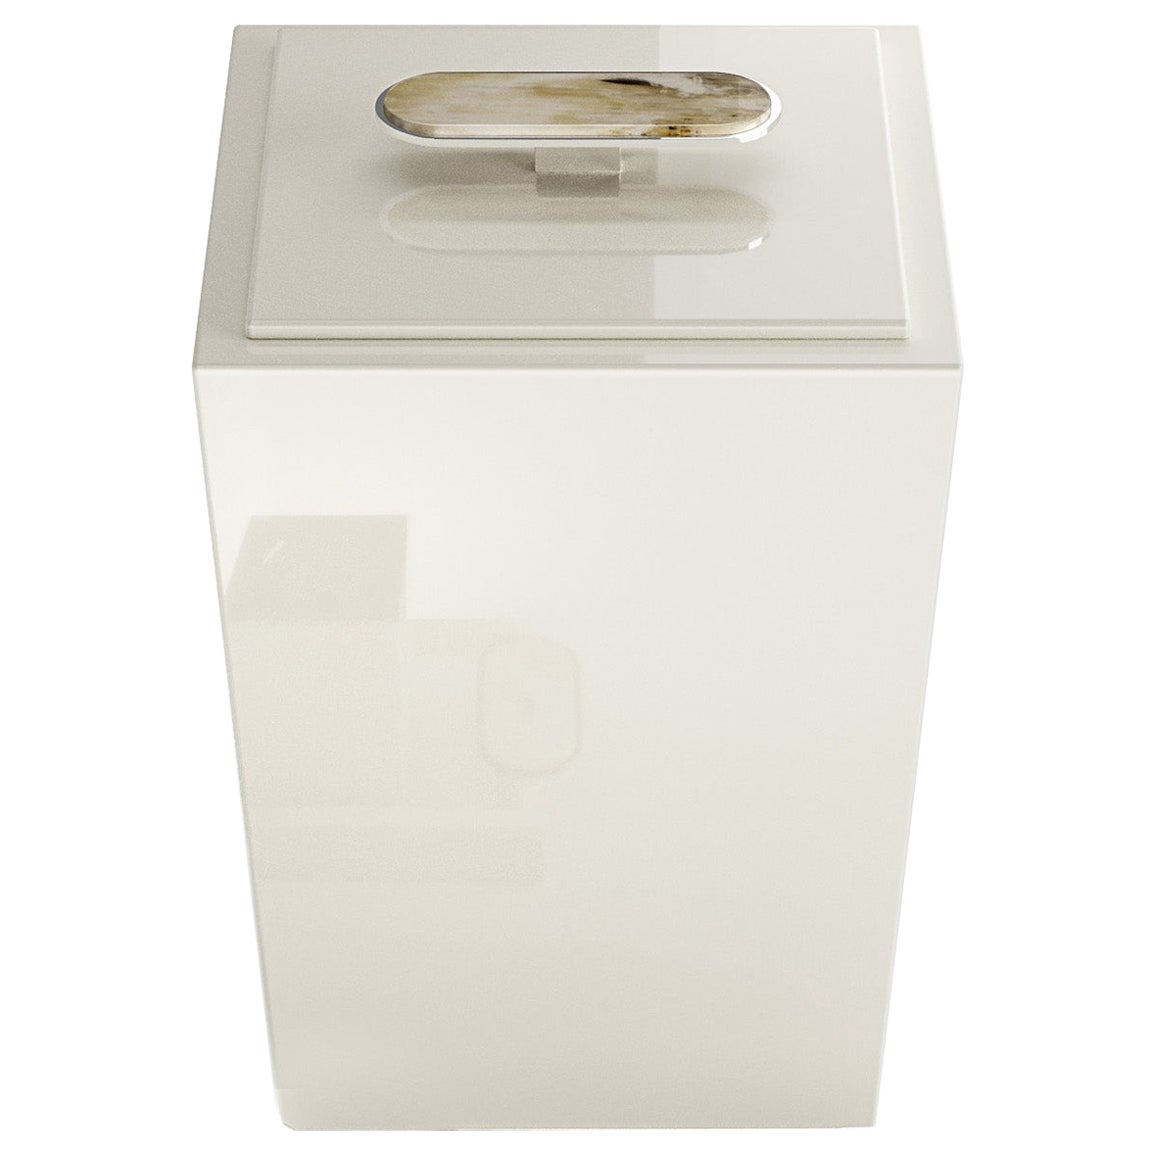 Bicco Waste Paper Basket in Ivory Lacquered Wood and Corno Italiano, Mod. 2425 For Sale